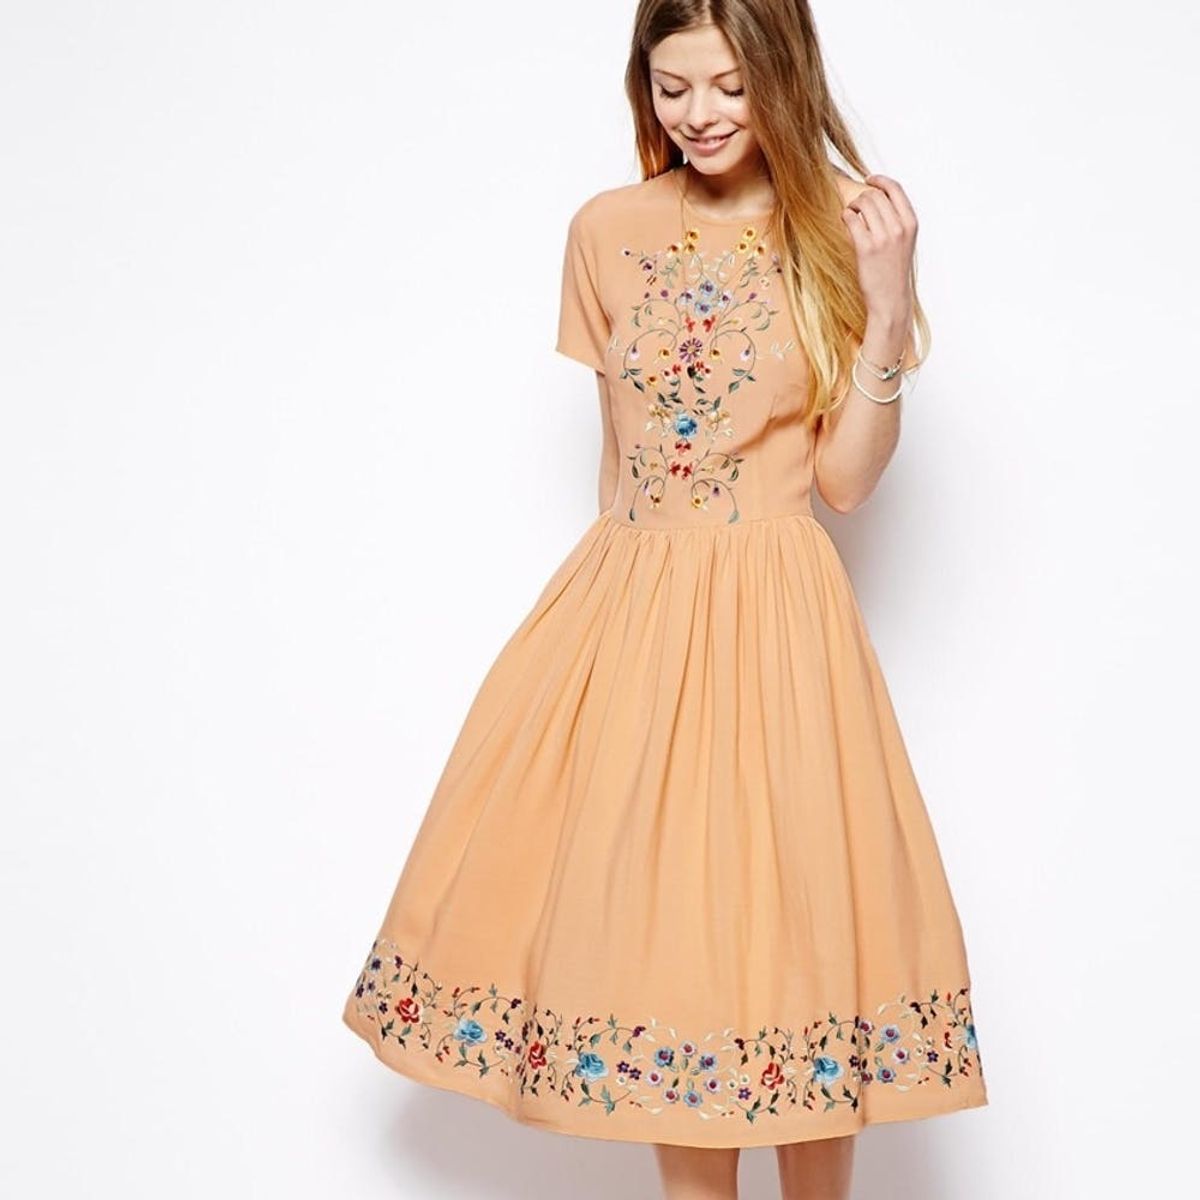 The Hunt is Over: 19 Colorful Frocks for Easter